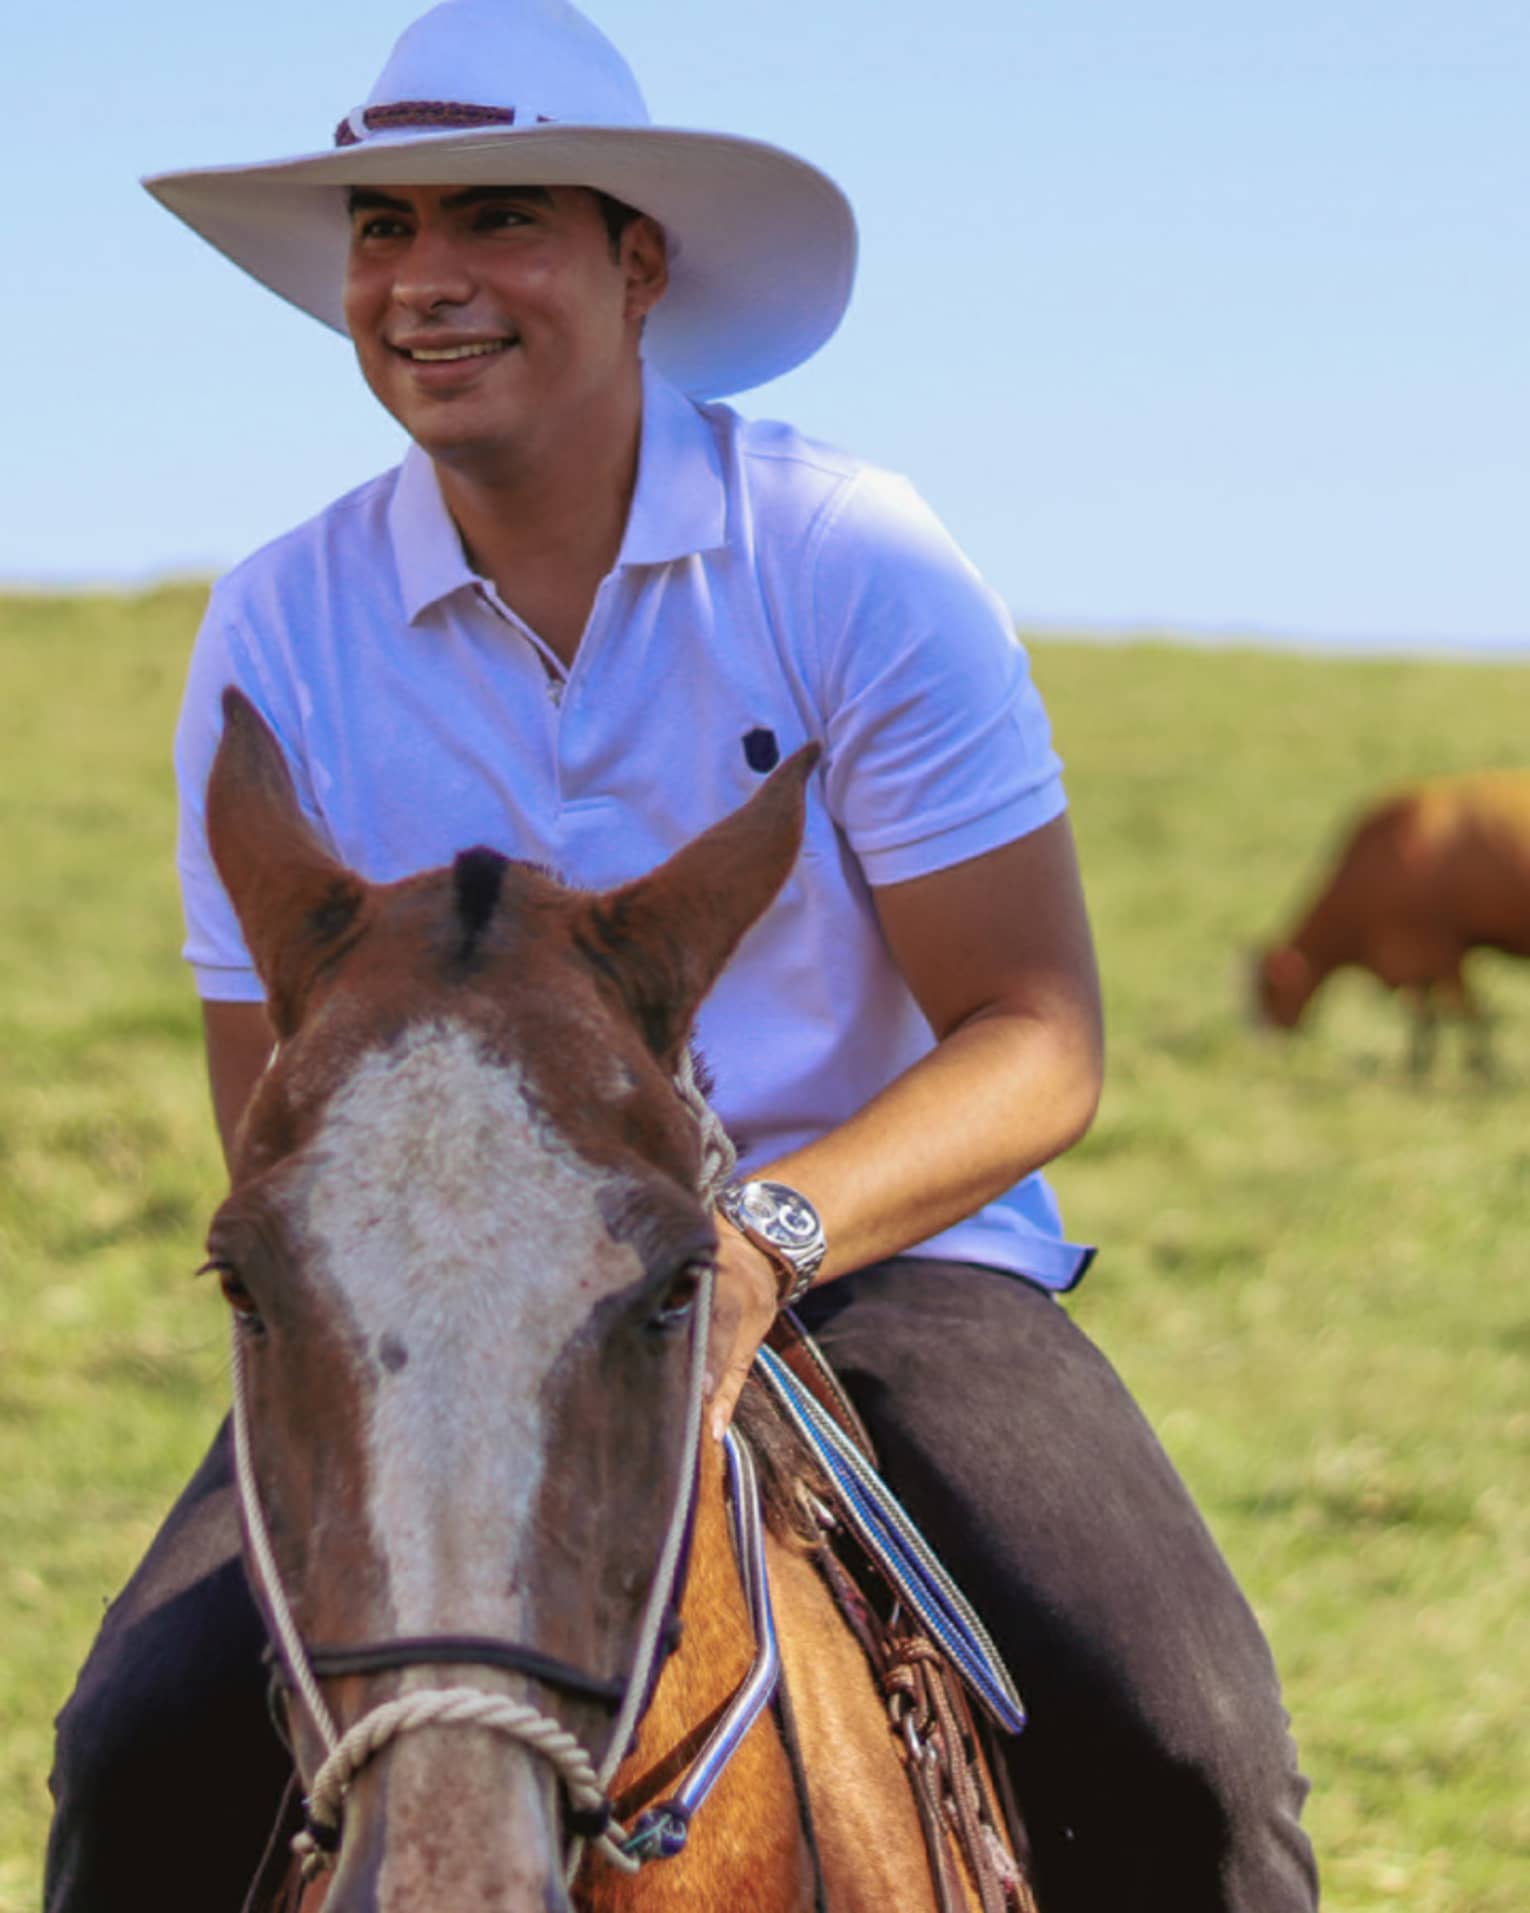 A grinning horseback rider in a white cowboy hat rides through a vast plain of green grass, cattle grazing in the background.